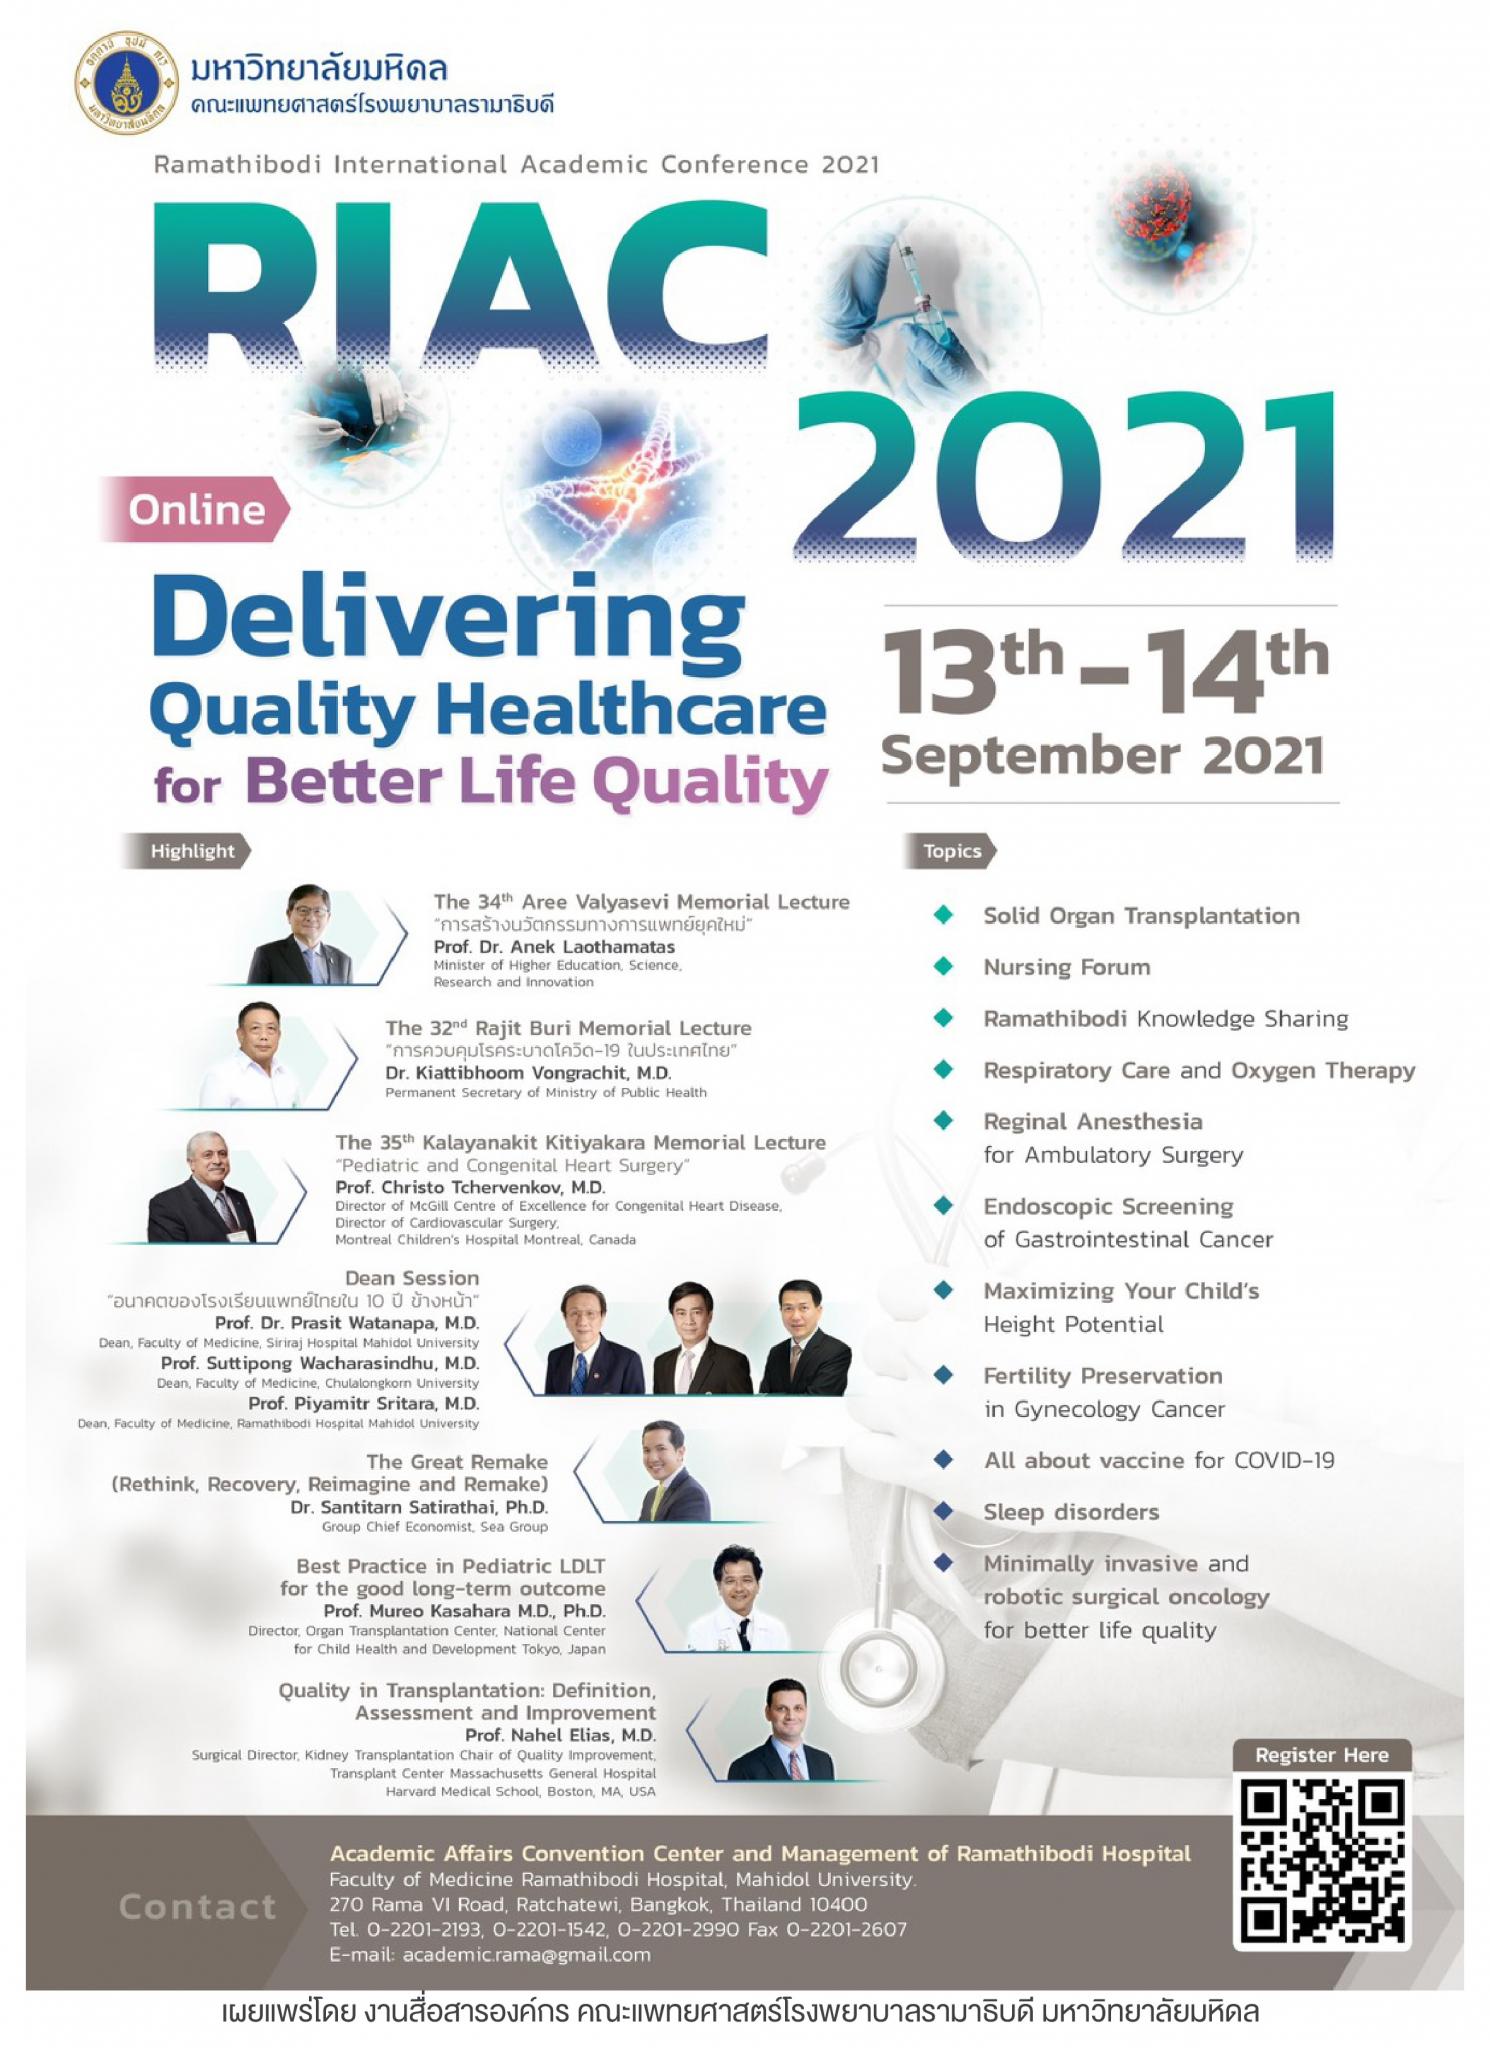 RIAC 2021 Delivering Quality Healthcare for Better Life Quality